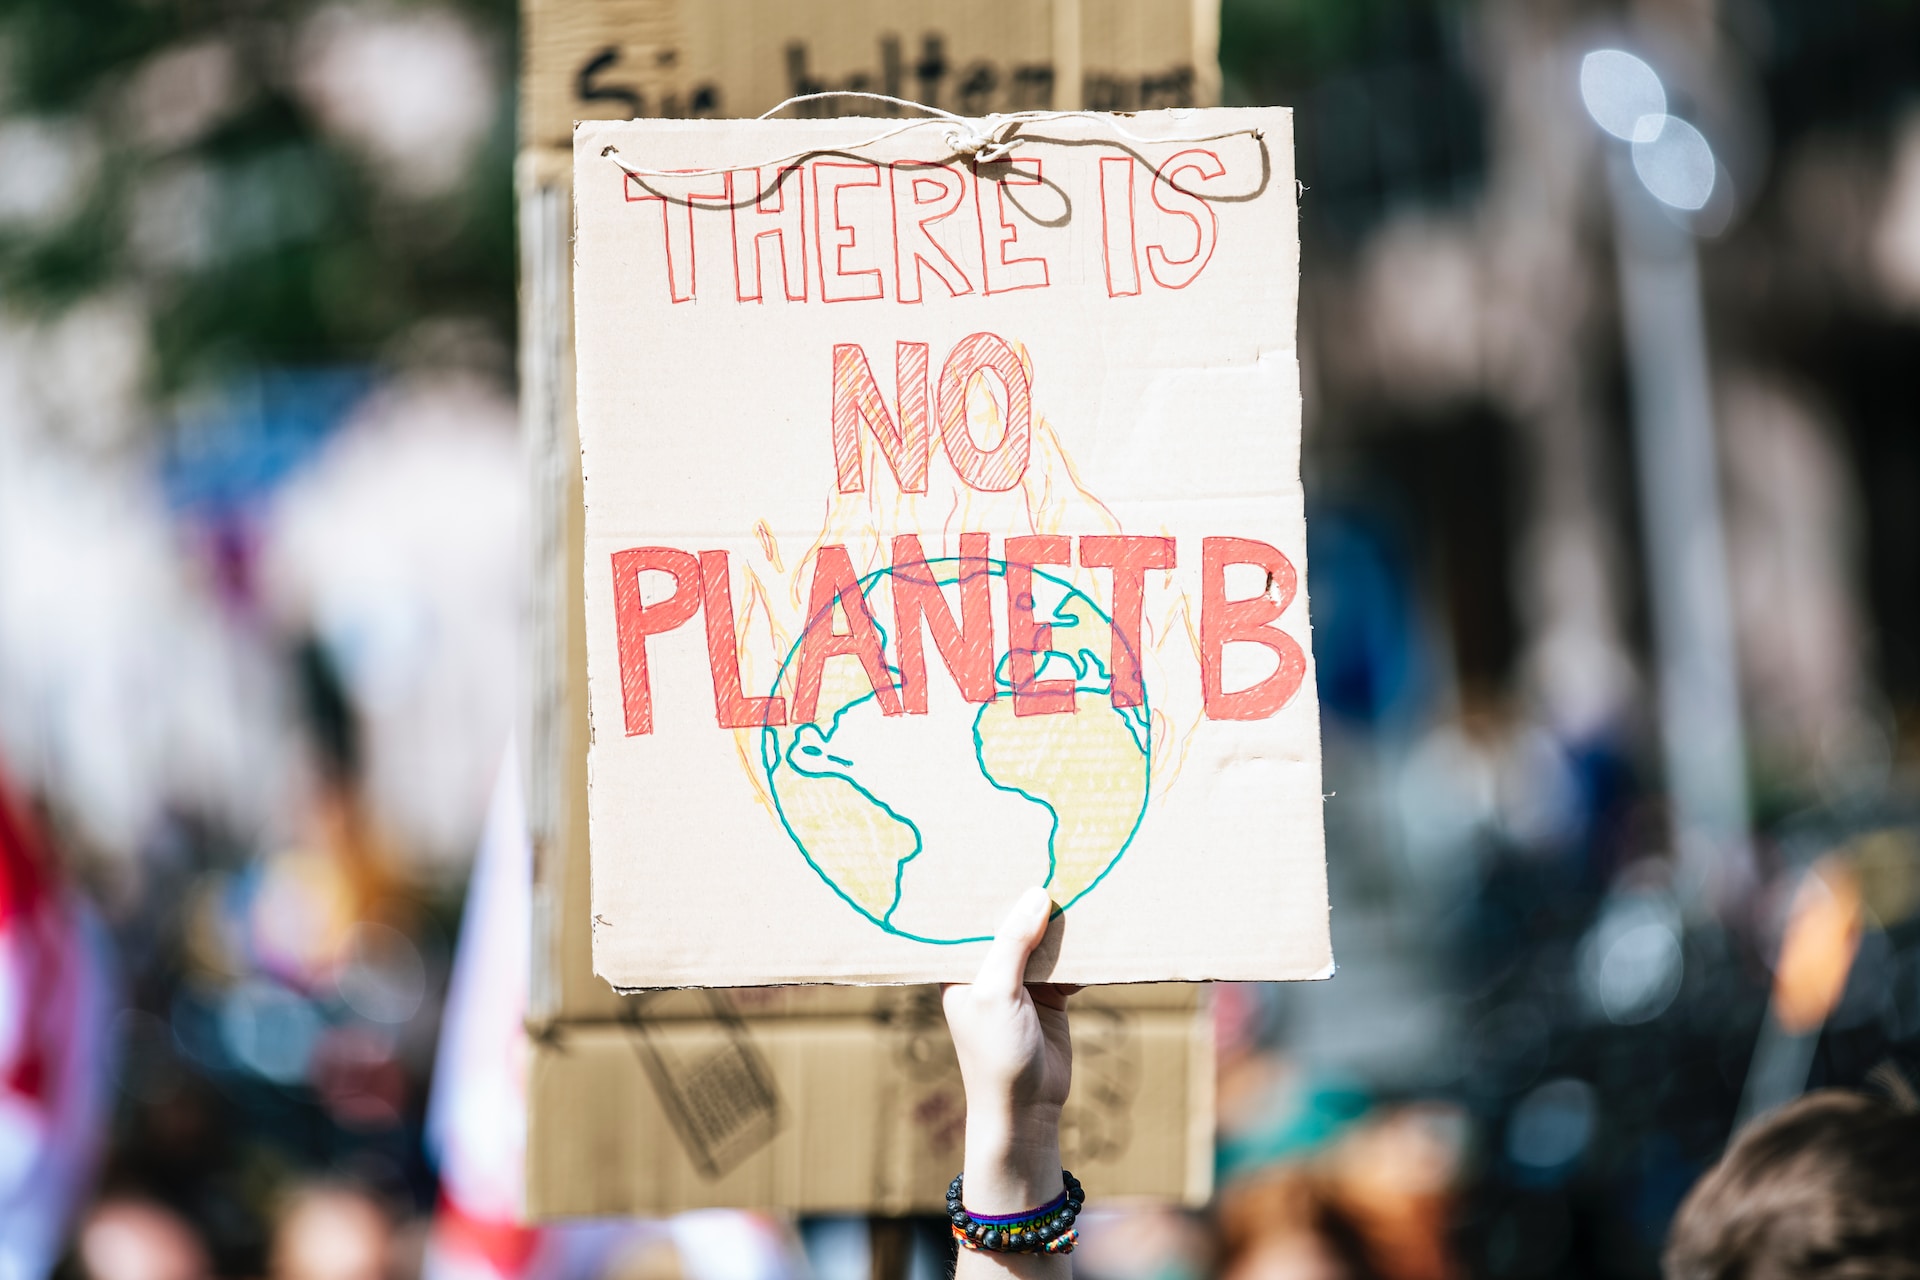 THERE IS NO PLANET B. Global climate change protest demonstration strike